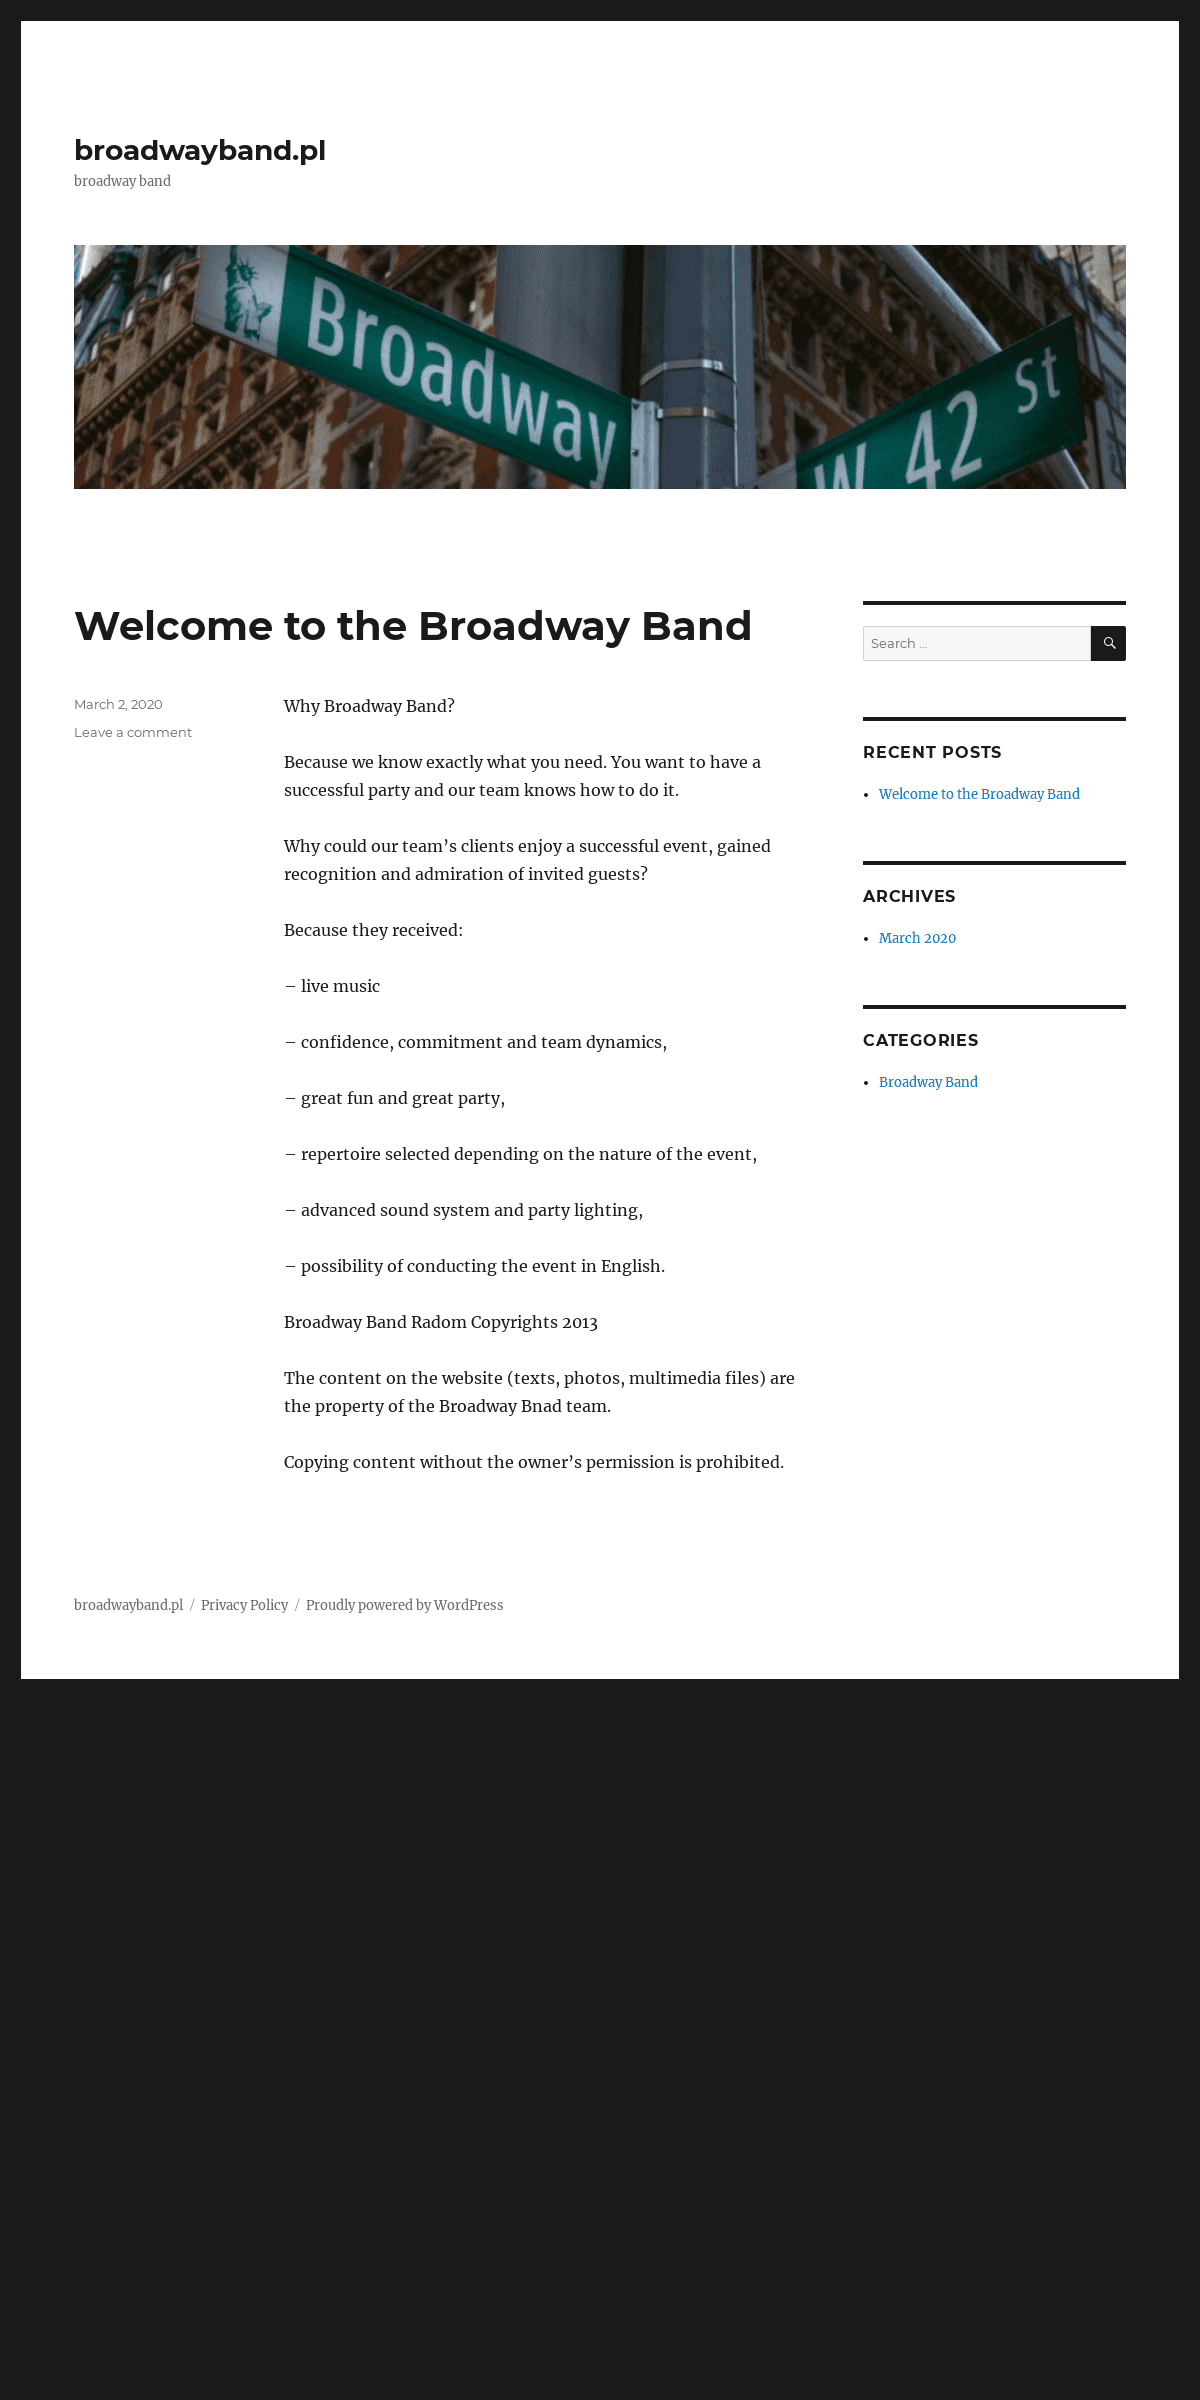 A complete backup of broadwayband.pl